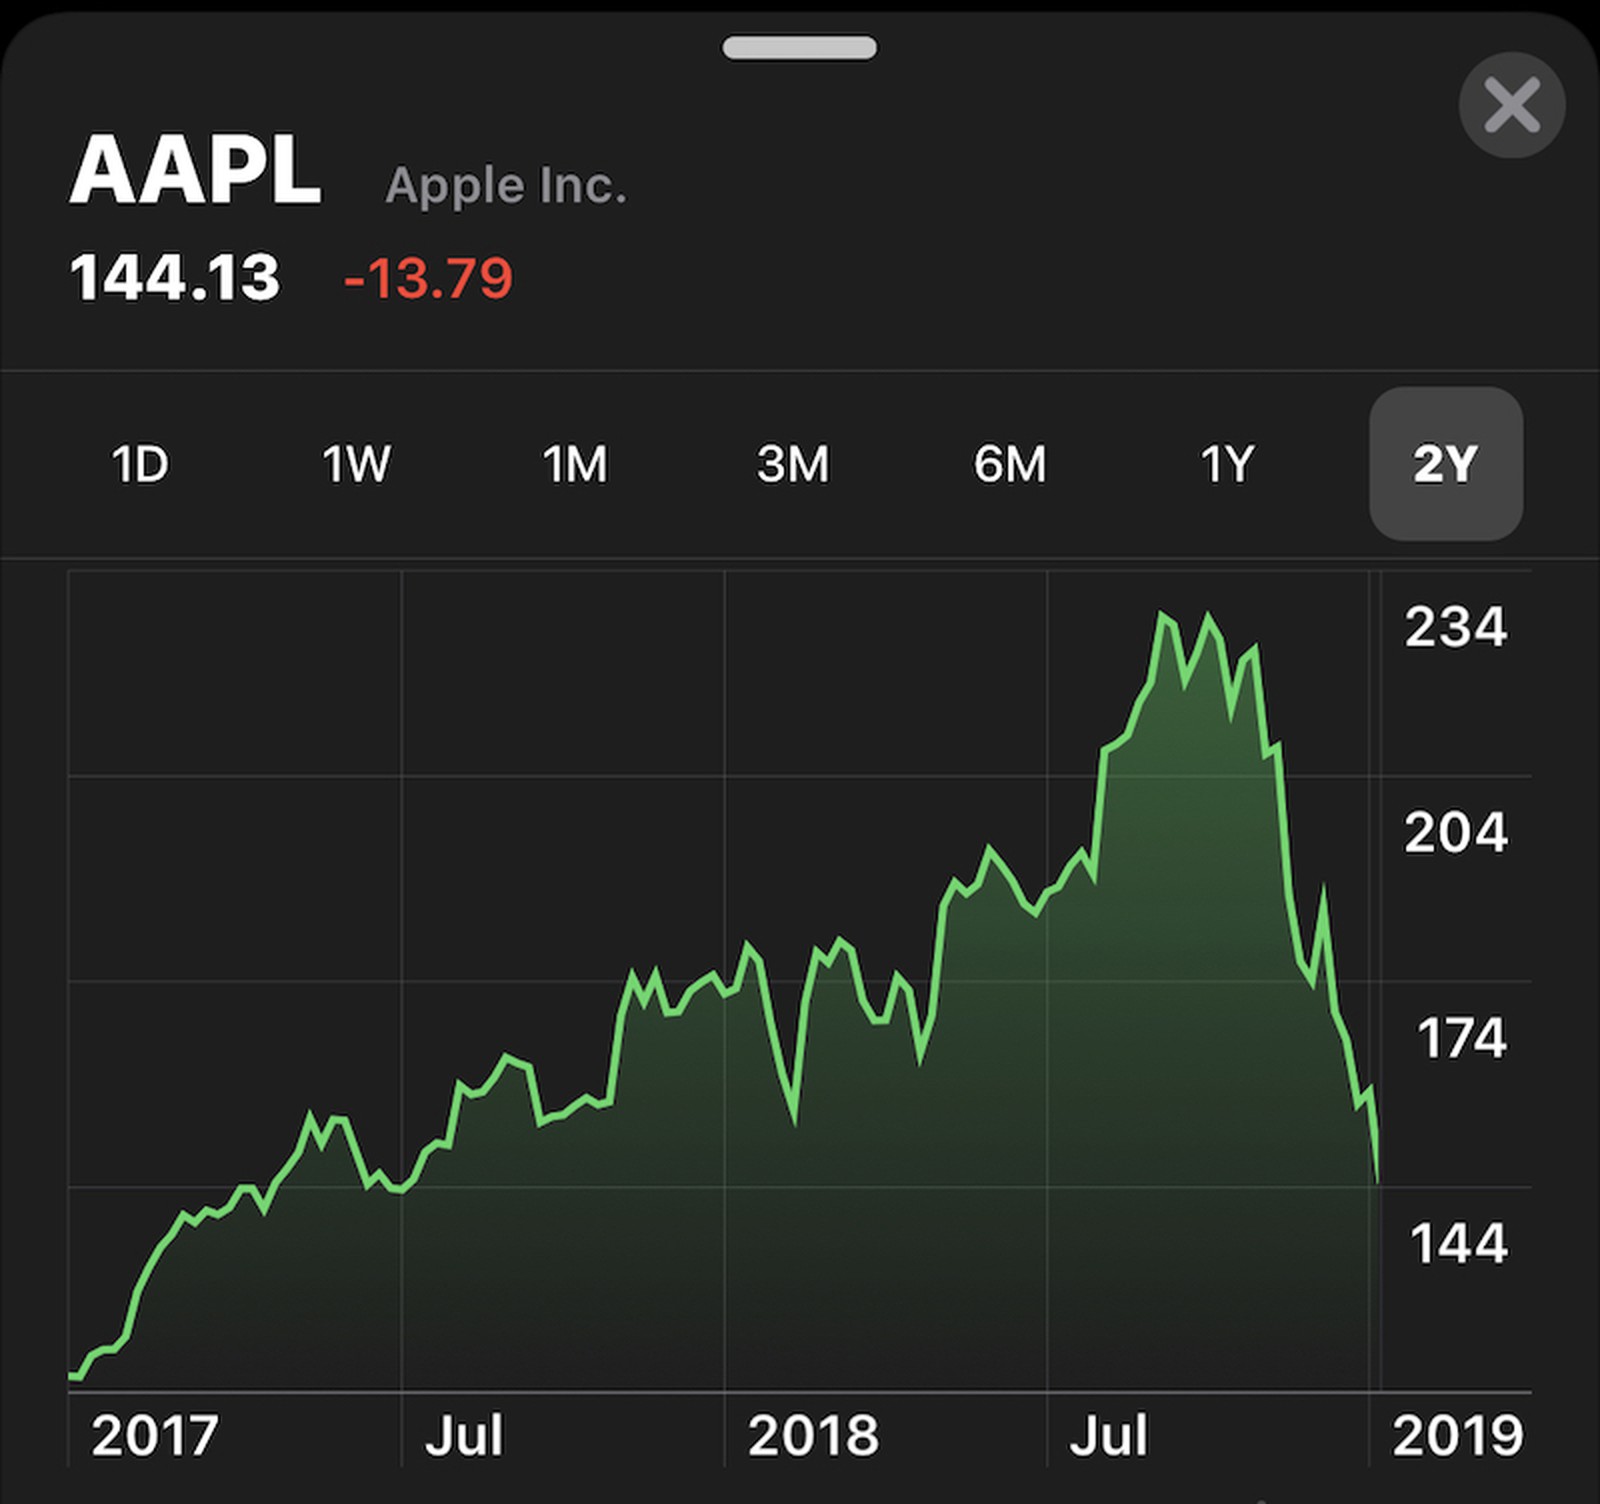 AAPL Opens at 144, Sliding Nearly 10 After Major Revenue Cut and Down